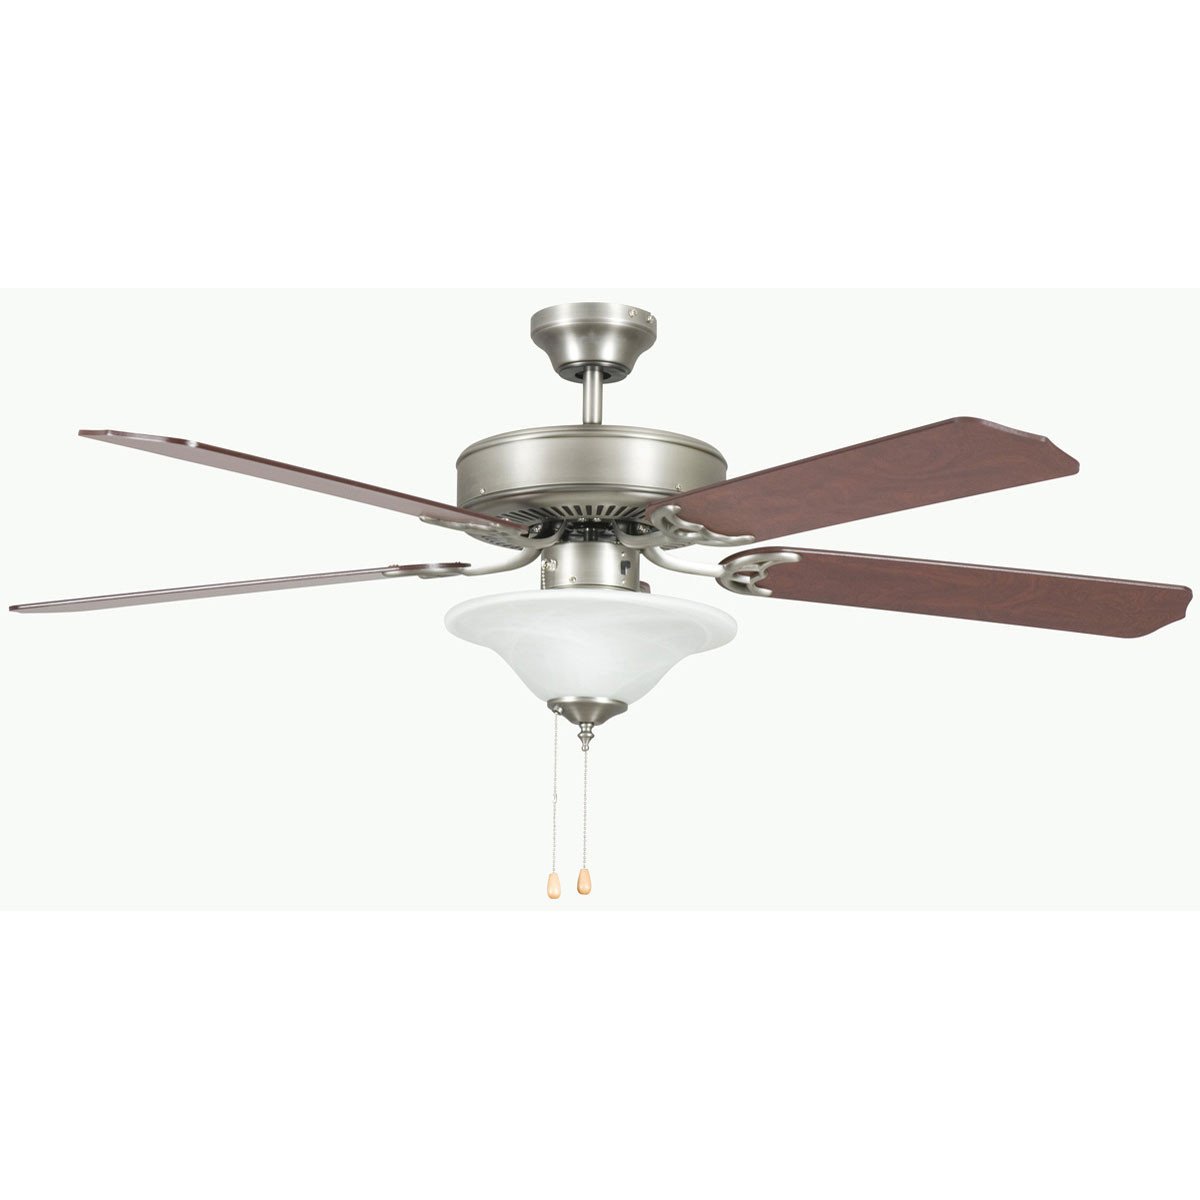 Concord Fans 52" Heritage Square Satin Nickel Ceiling Fan with Light Kit